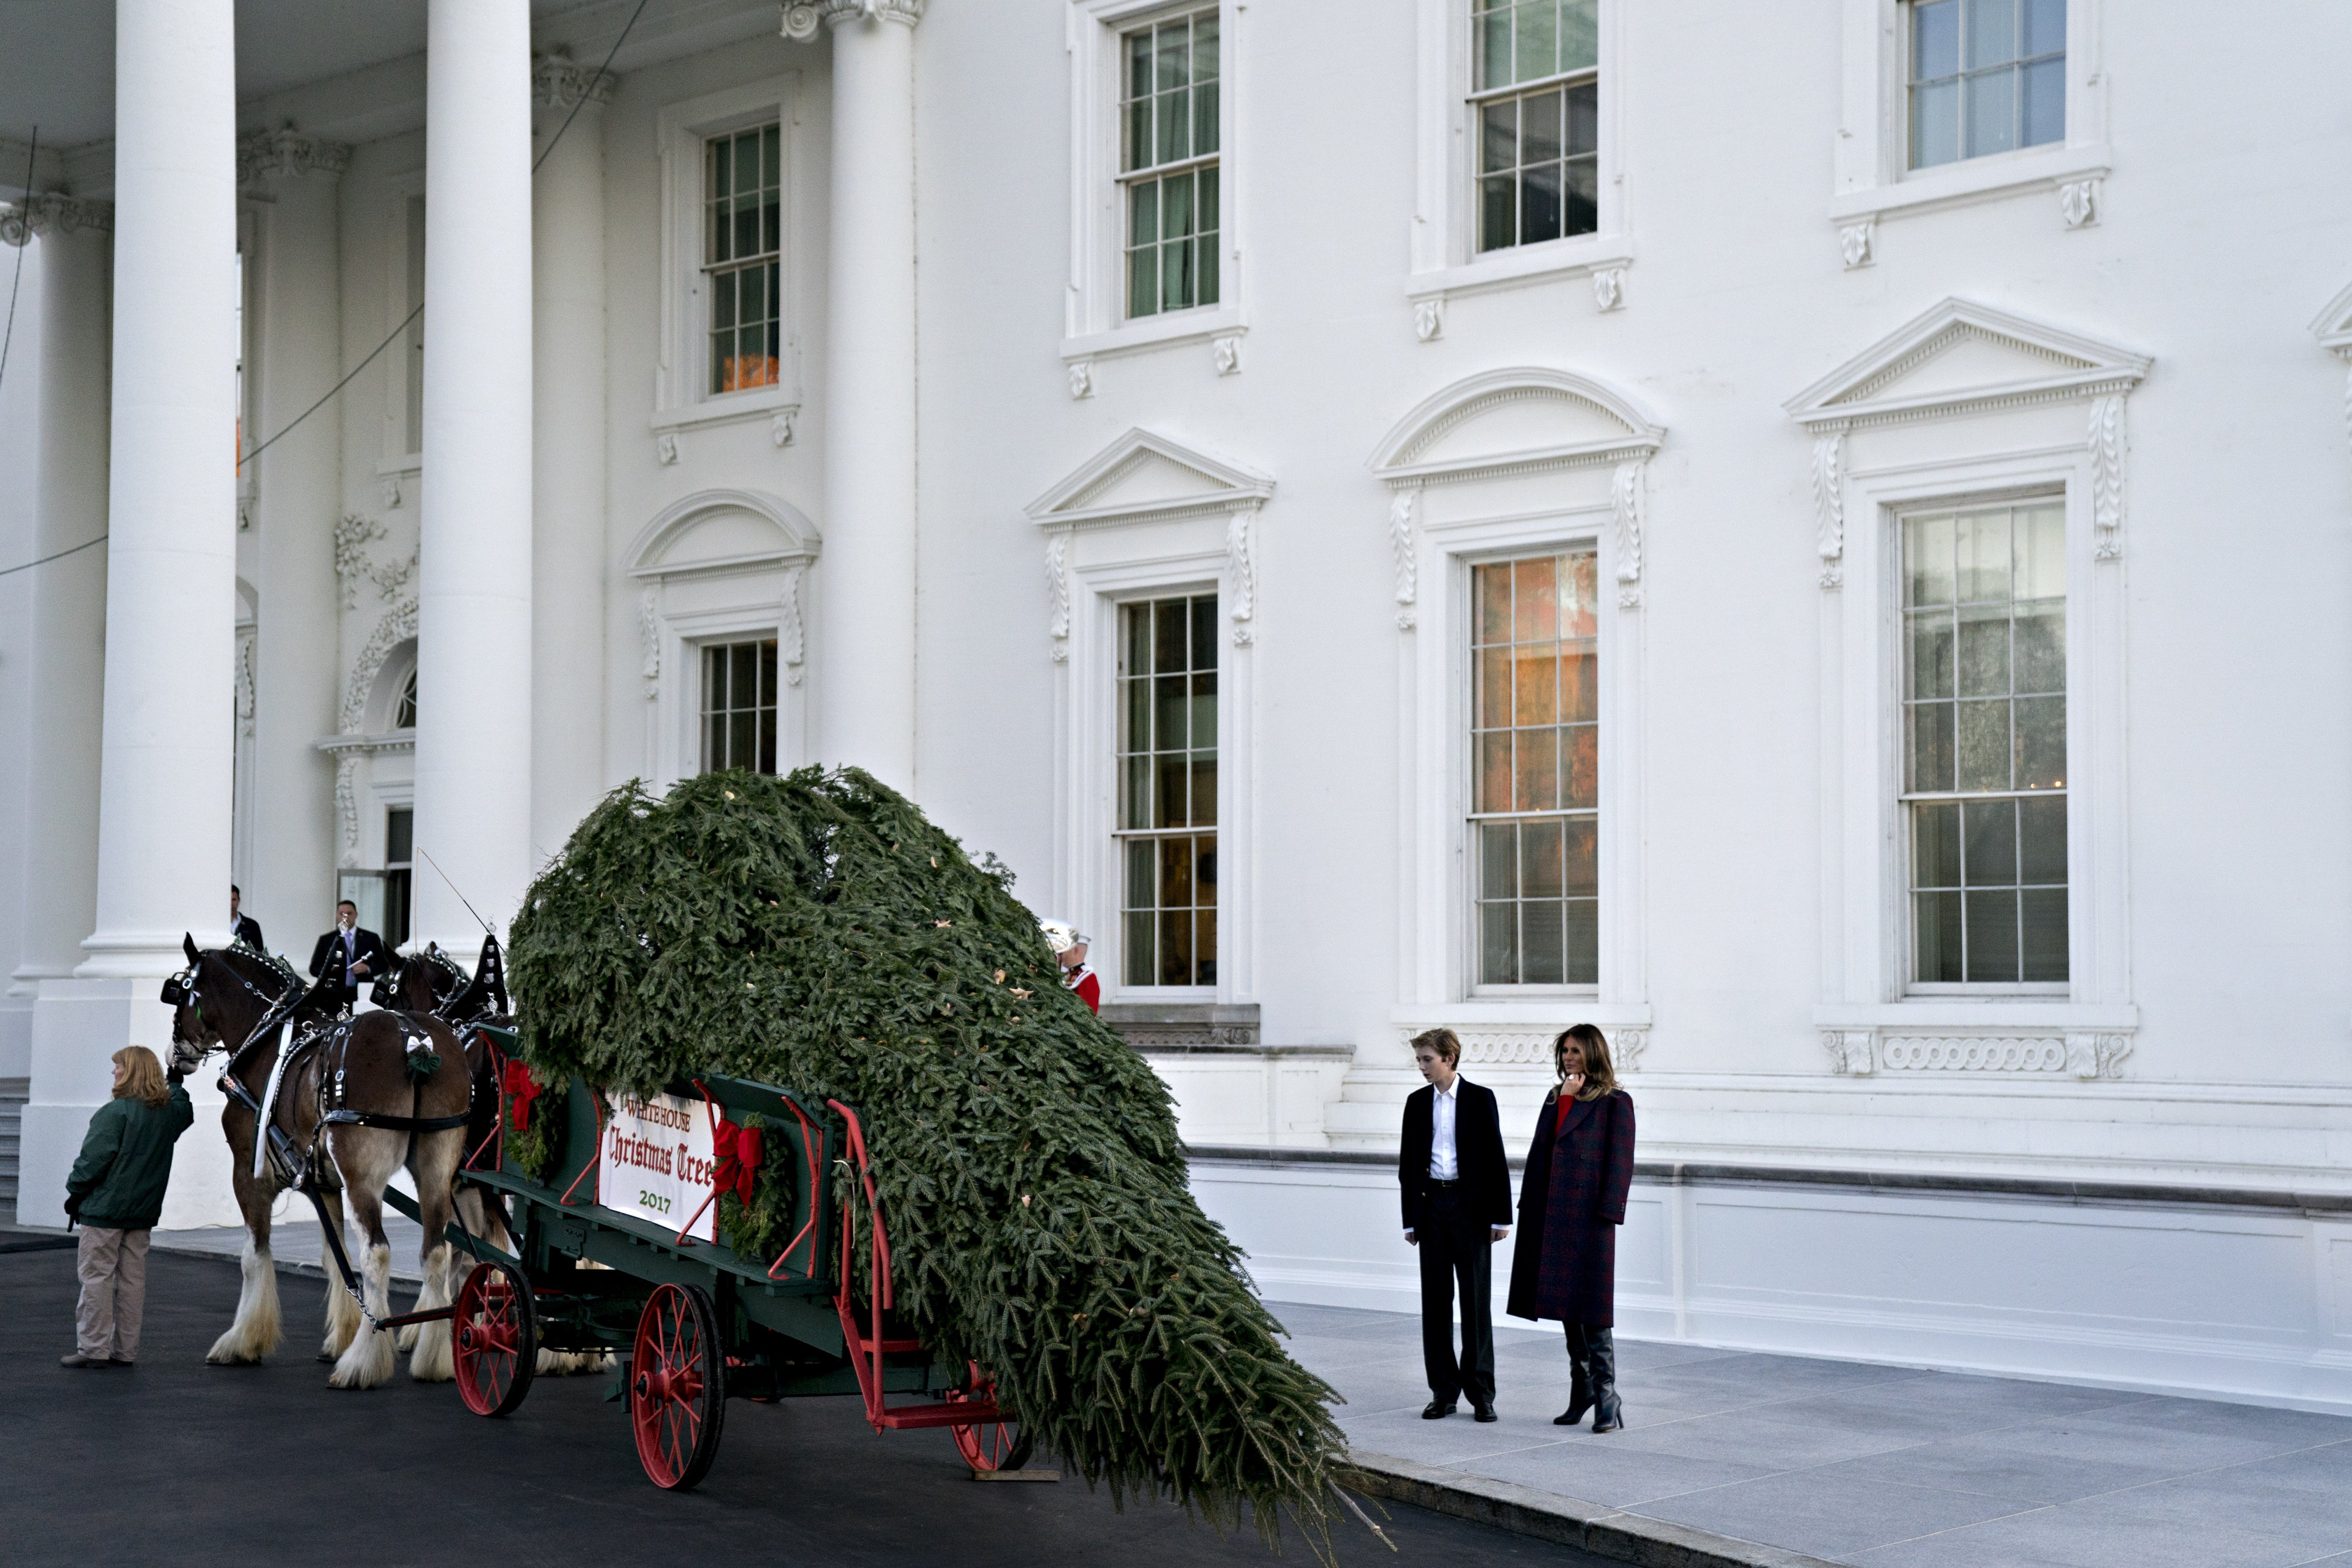 U.S. First Lady Melania Trump, right, and son Barron Trump view the White House Christmas Tree at the North Portico of the White House in Washington, D.C., on Nov. 20, 2017. Silent Night Evergreens presented the Wisconsin-grown Christmas Tree to Melania and the tree will be displayed in the White House Blue Room. (Andrew Harrer—Bloomberg/Getty Images)